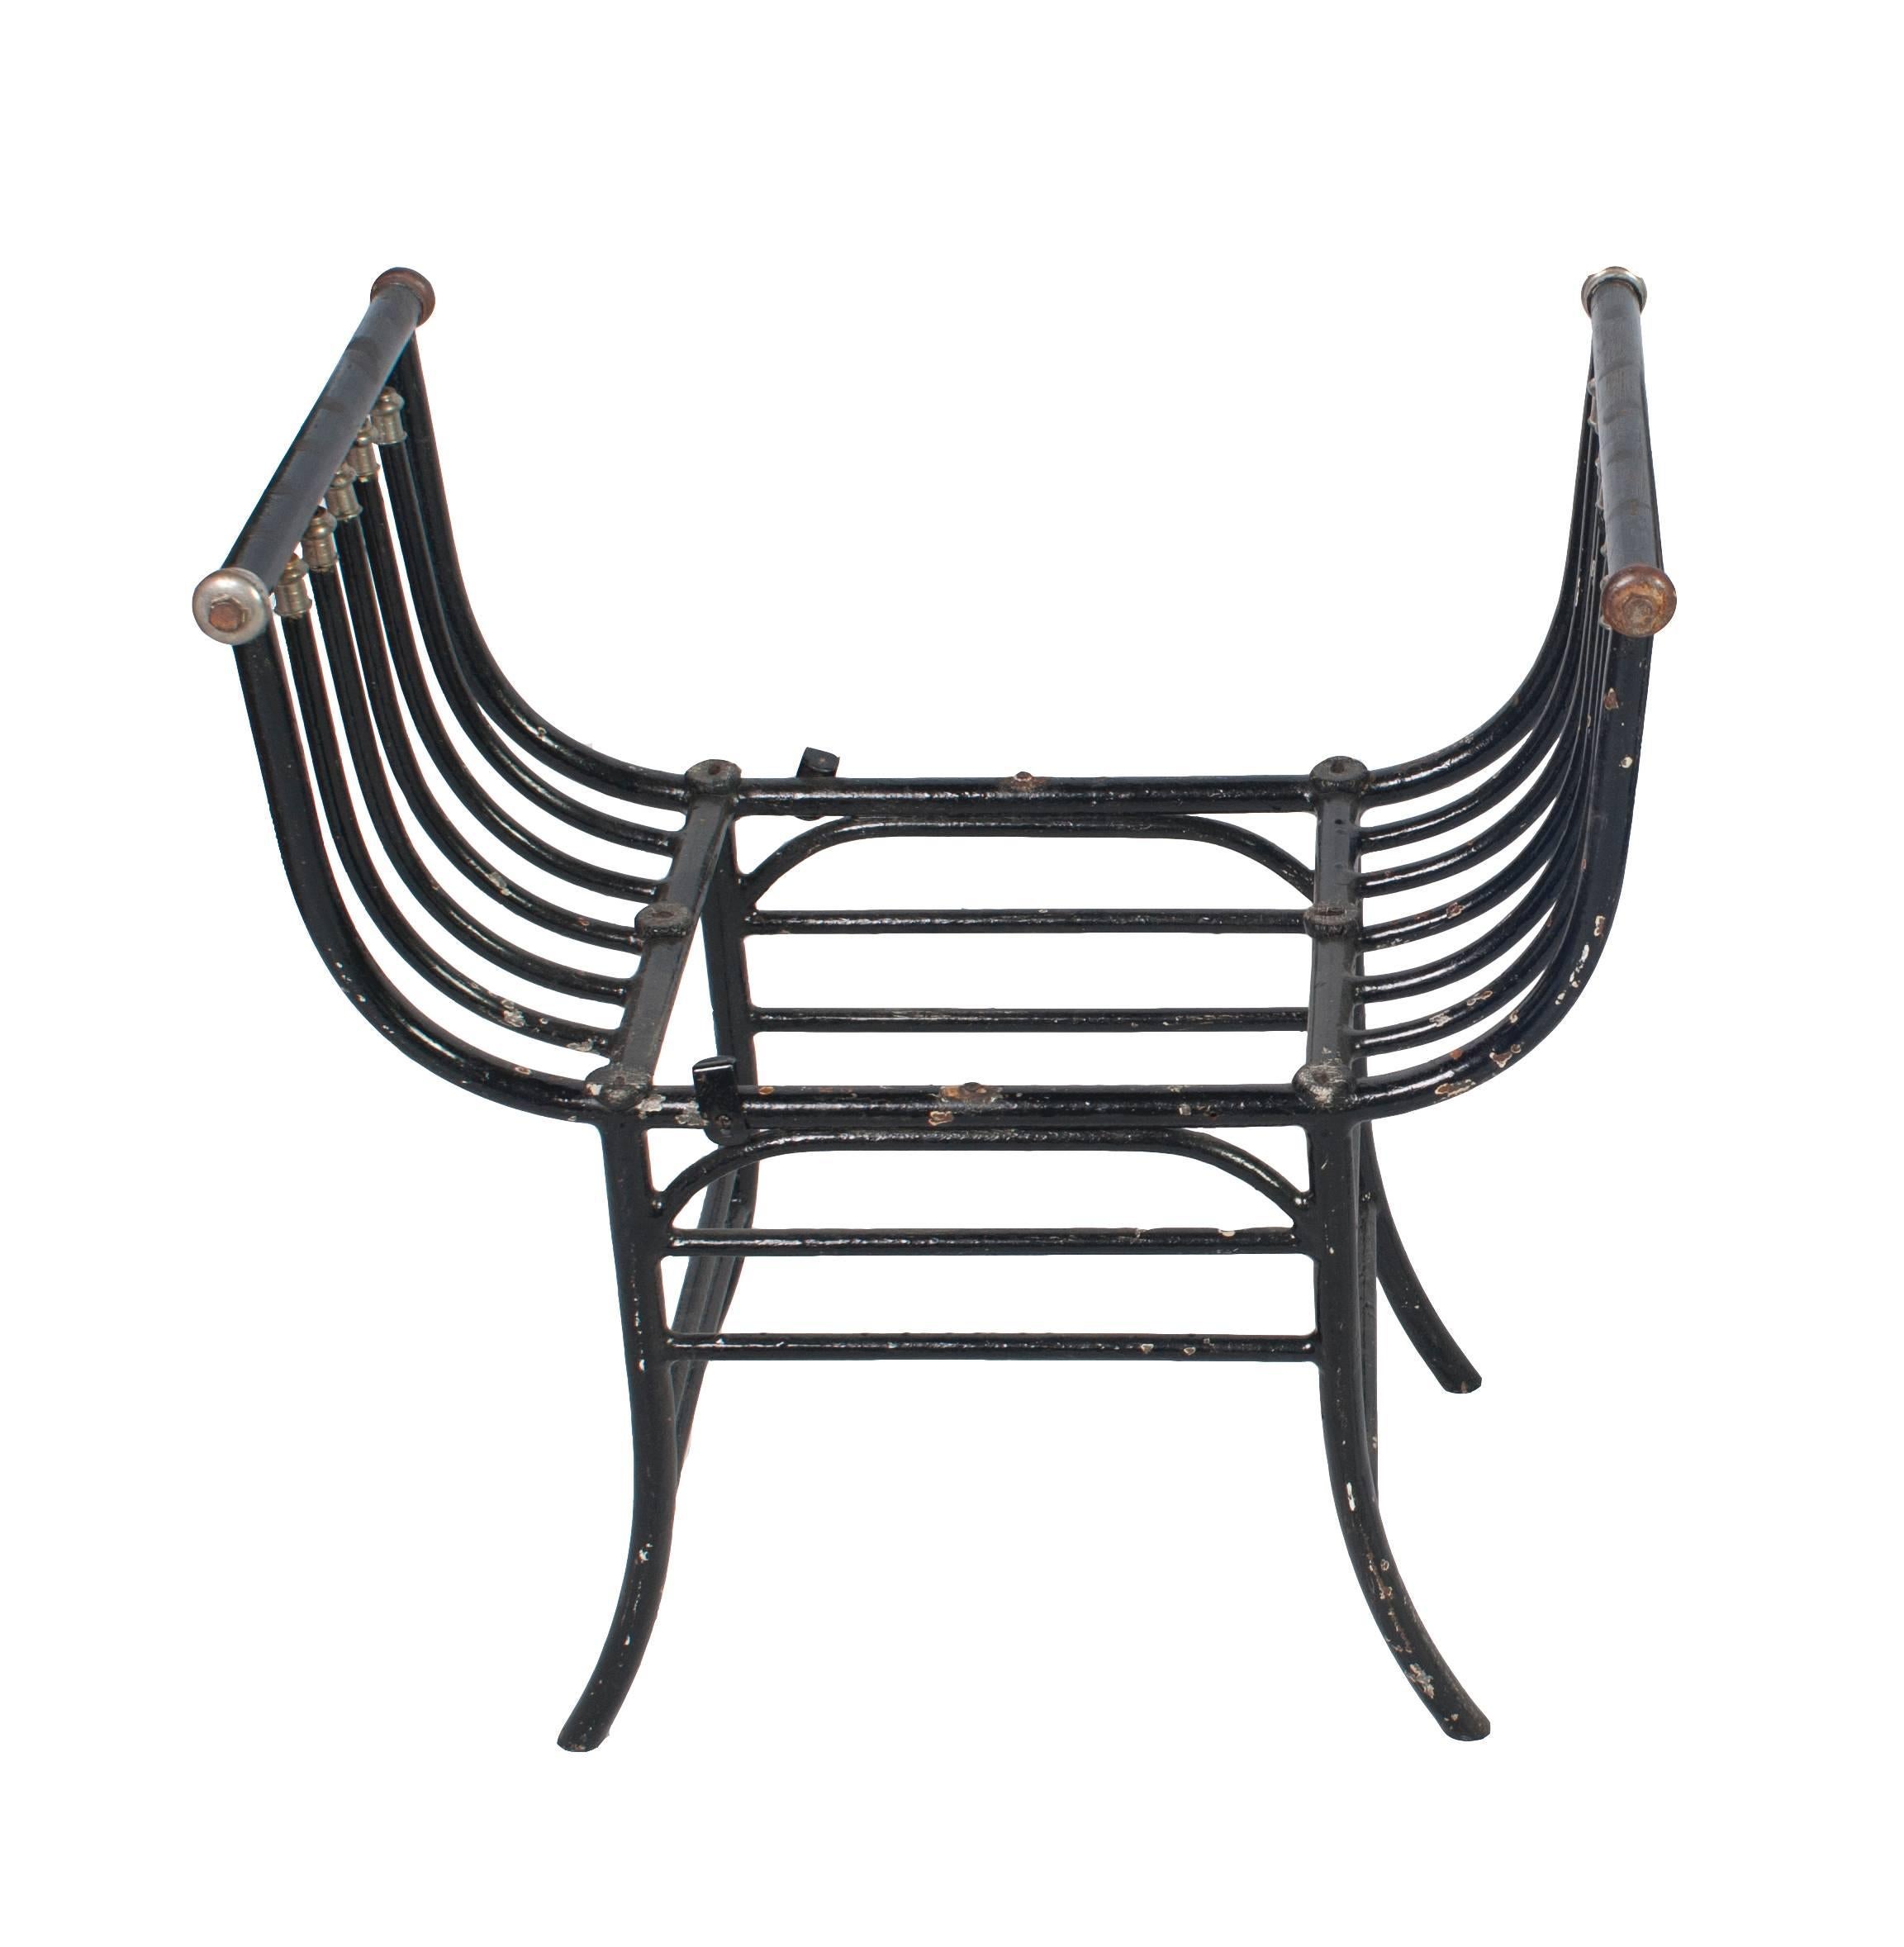 A pair of black painted wrought iron window seats or stools.